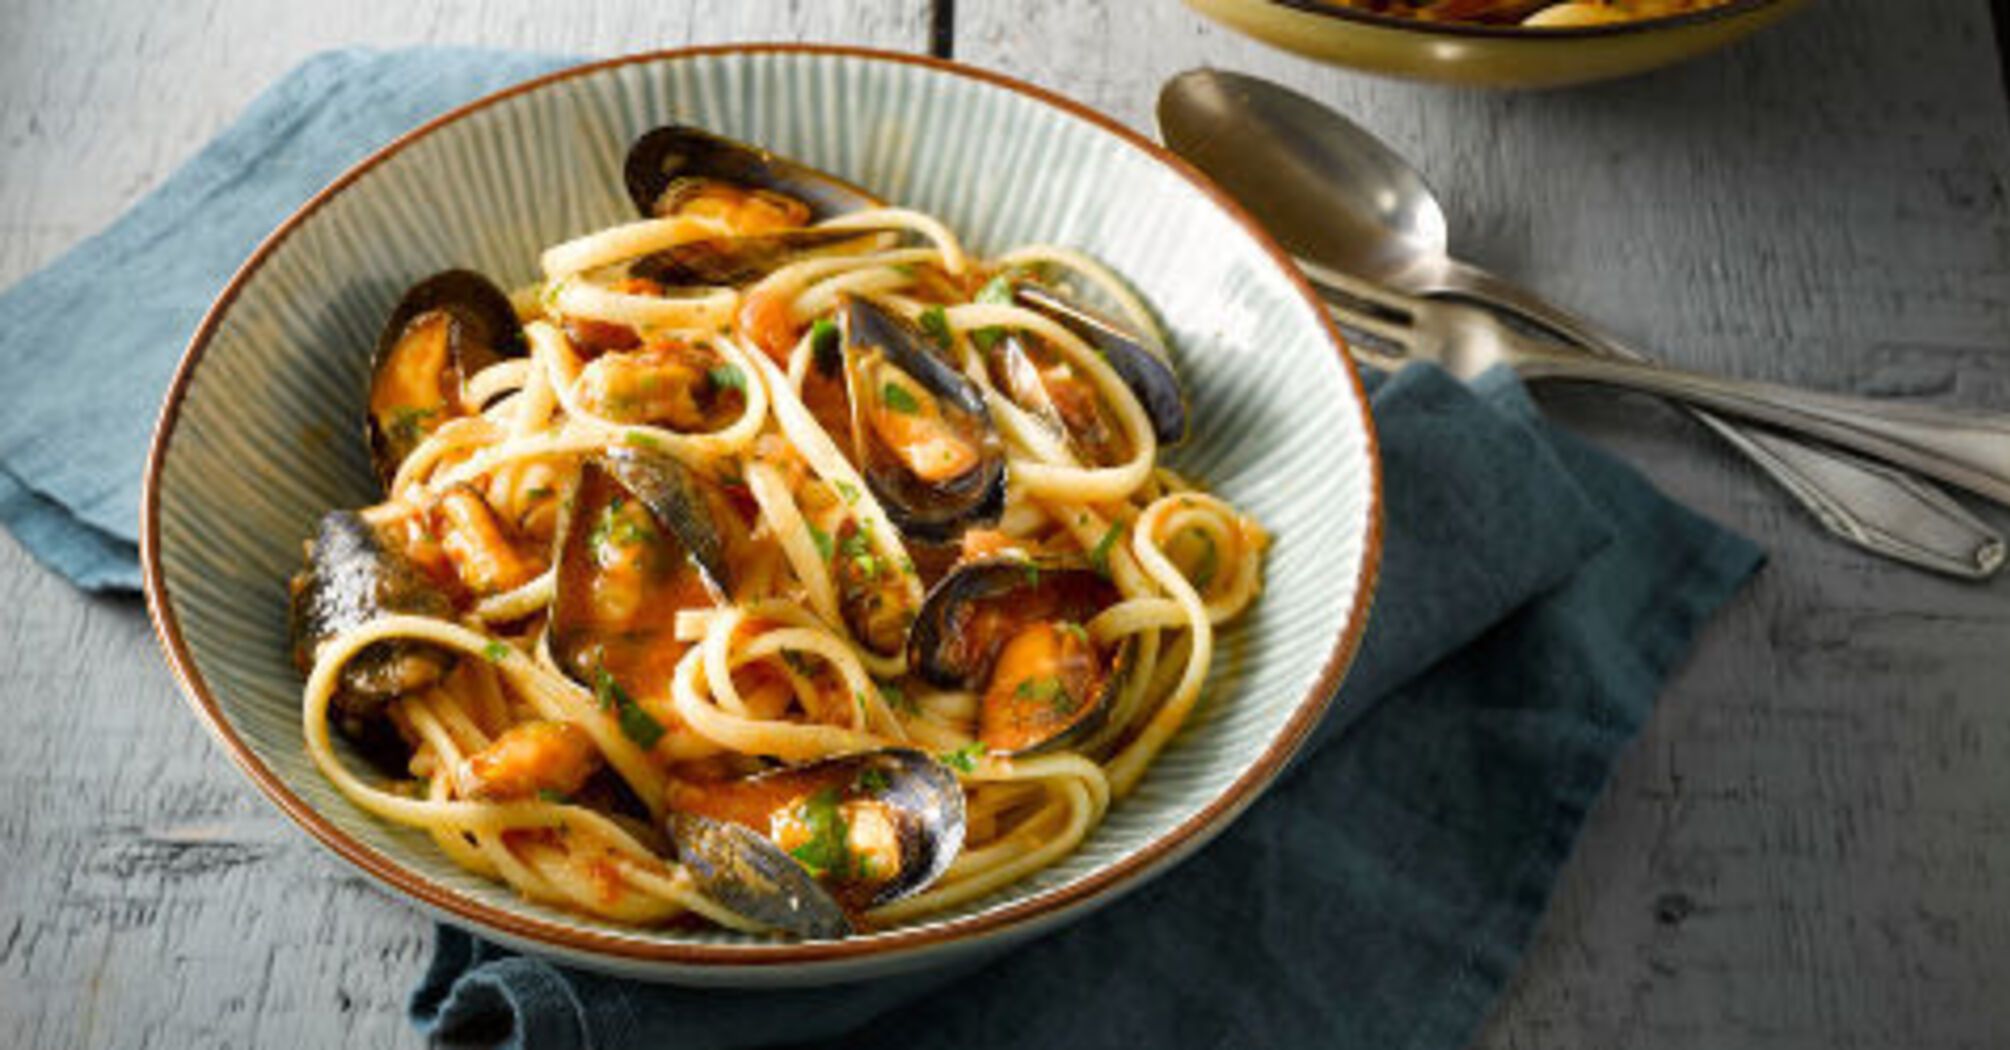 Not just pasta: how to make delicious pasta with mussels for a hearty lunch